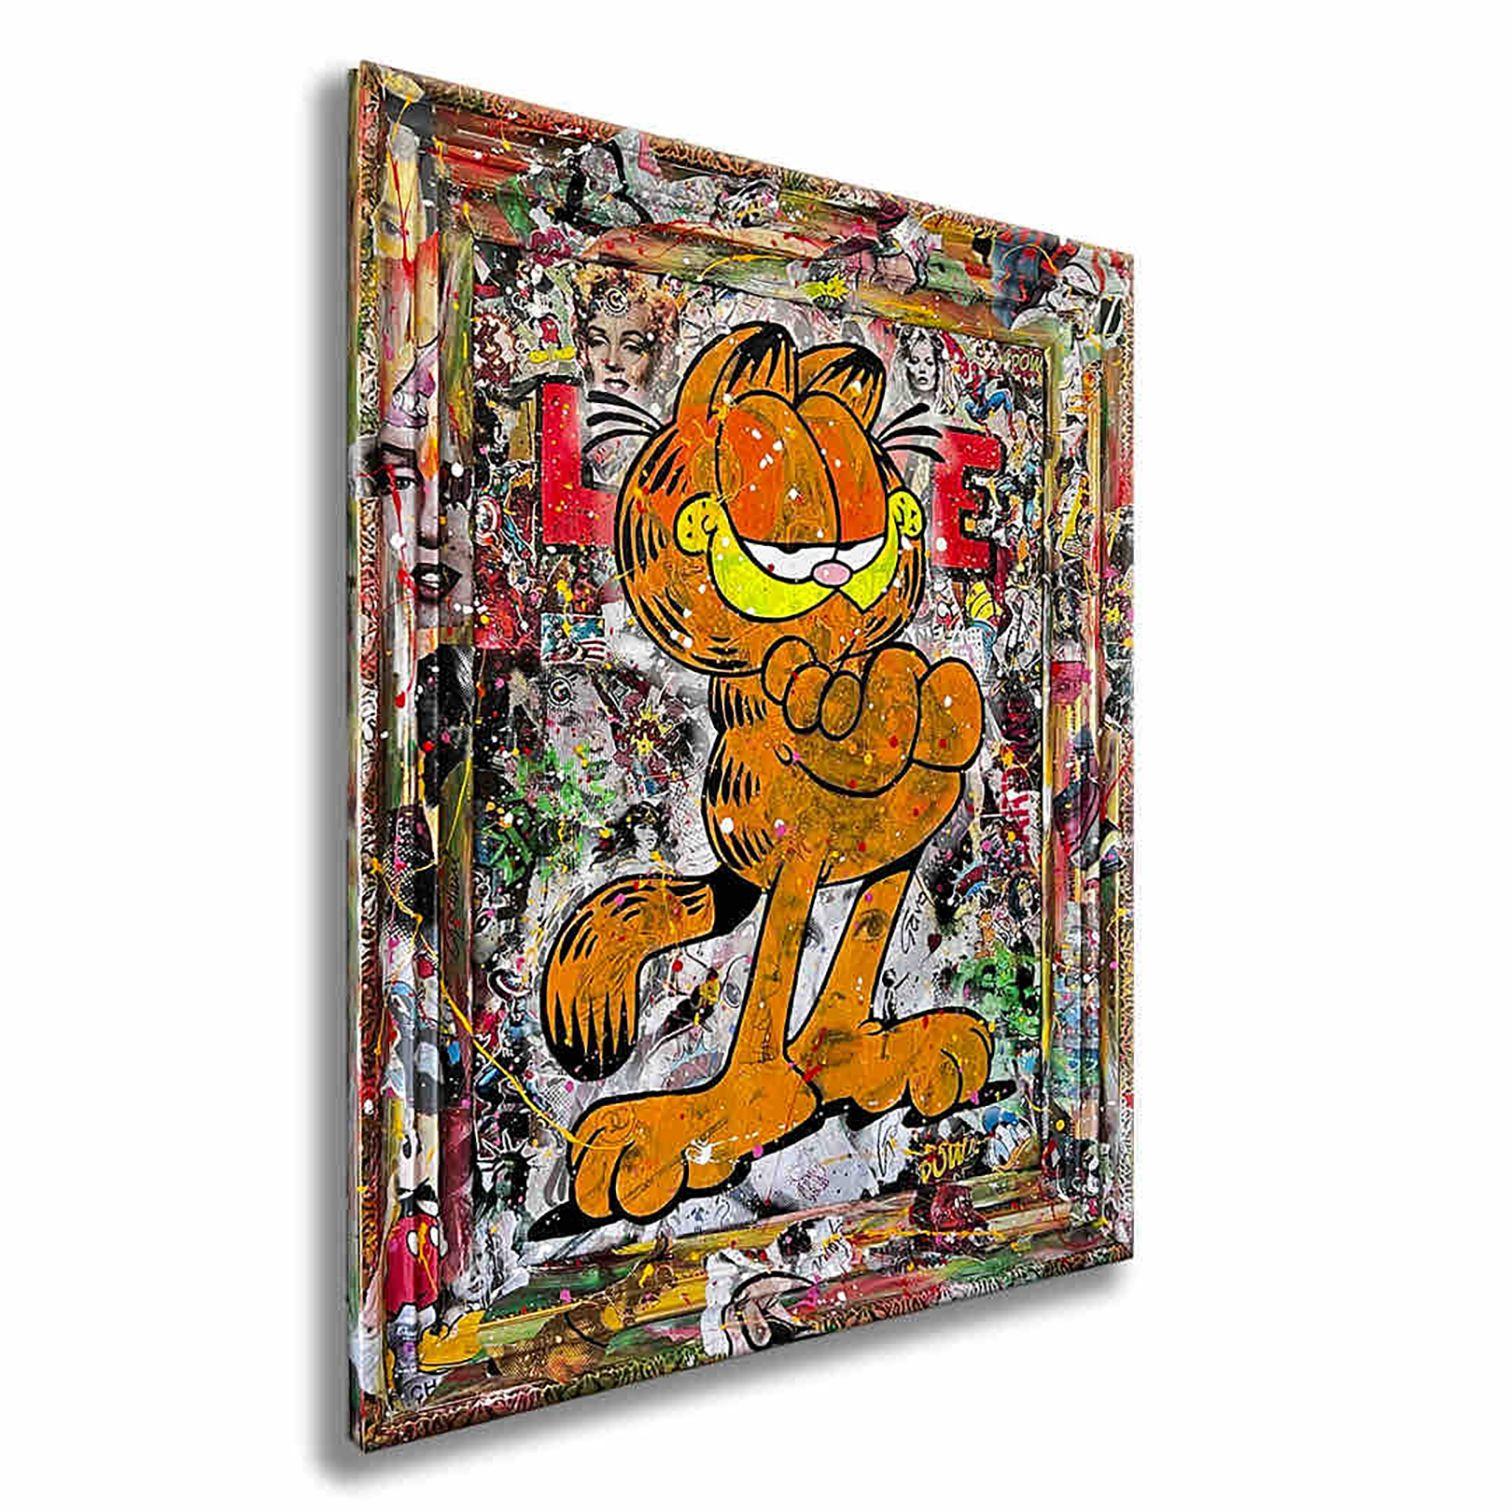 Garfield world â€“ Original Painting on Canvas, Painting, Acrylic on Canvas For Sale 1